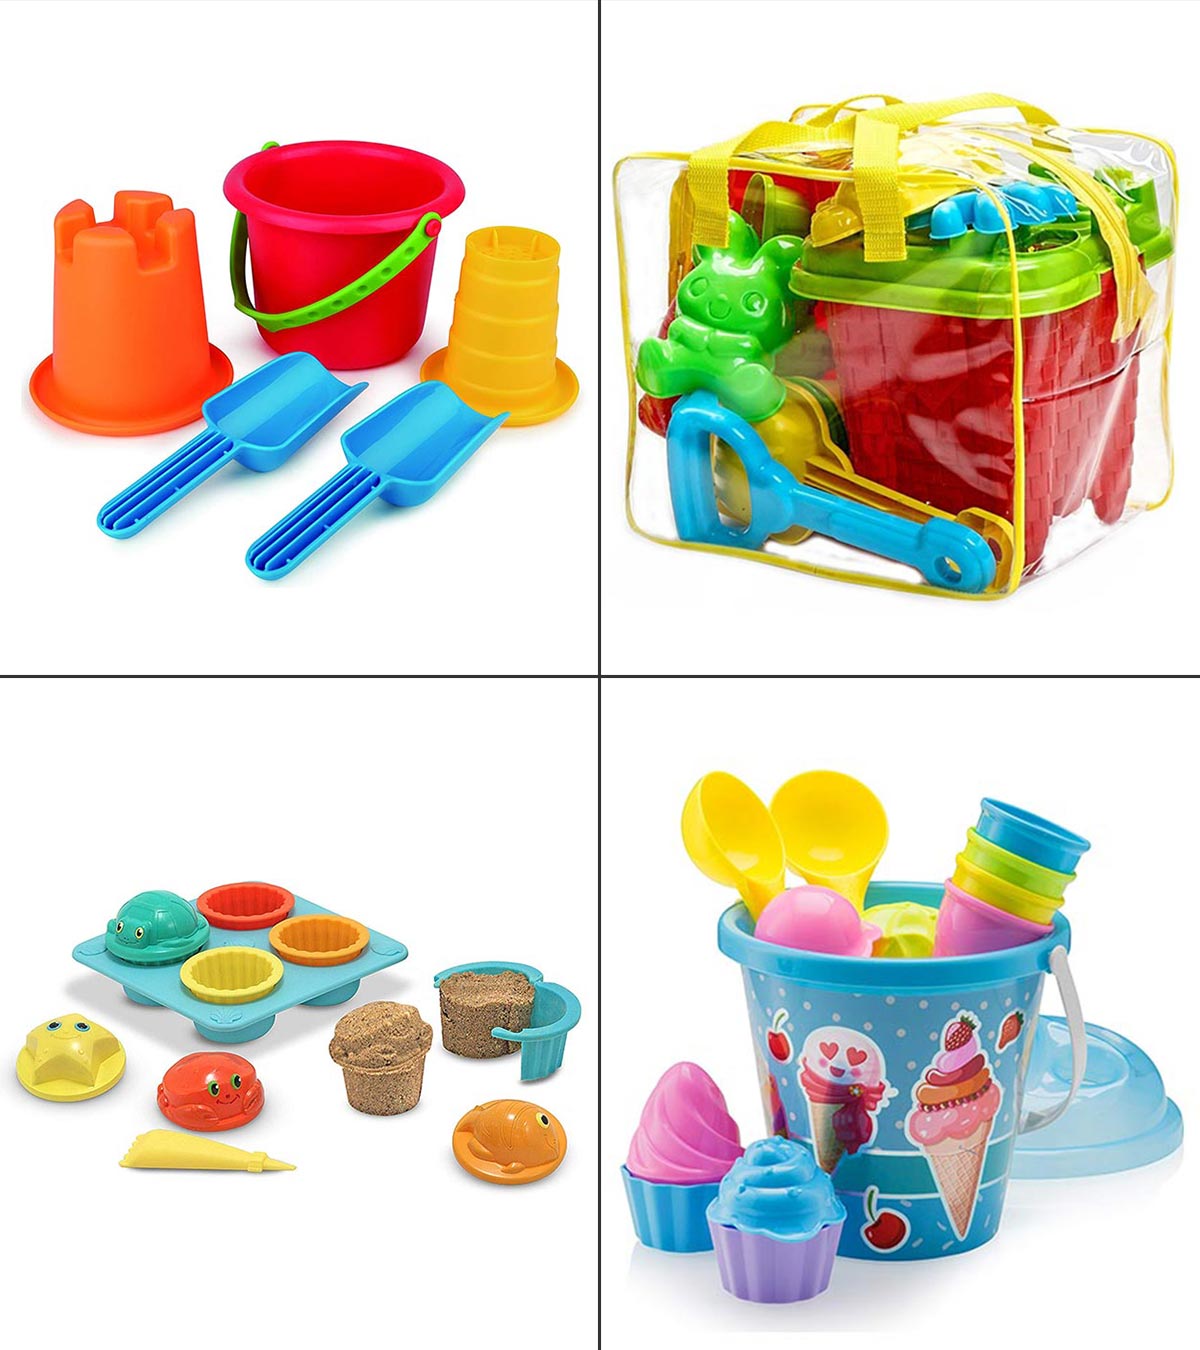 TOYMYTOY Sand Toy Set 8Pcs Beach Castle Sand Tools Creative Sand Moulds Kits with Bucket for Kids